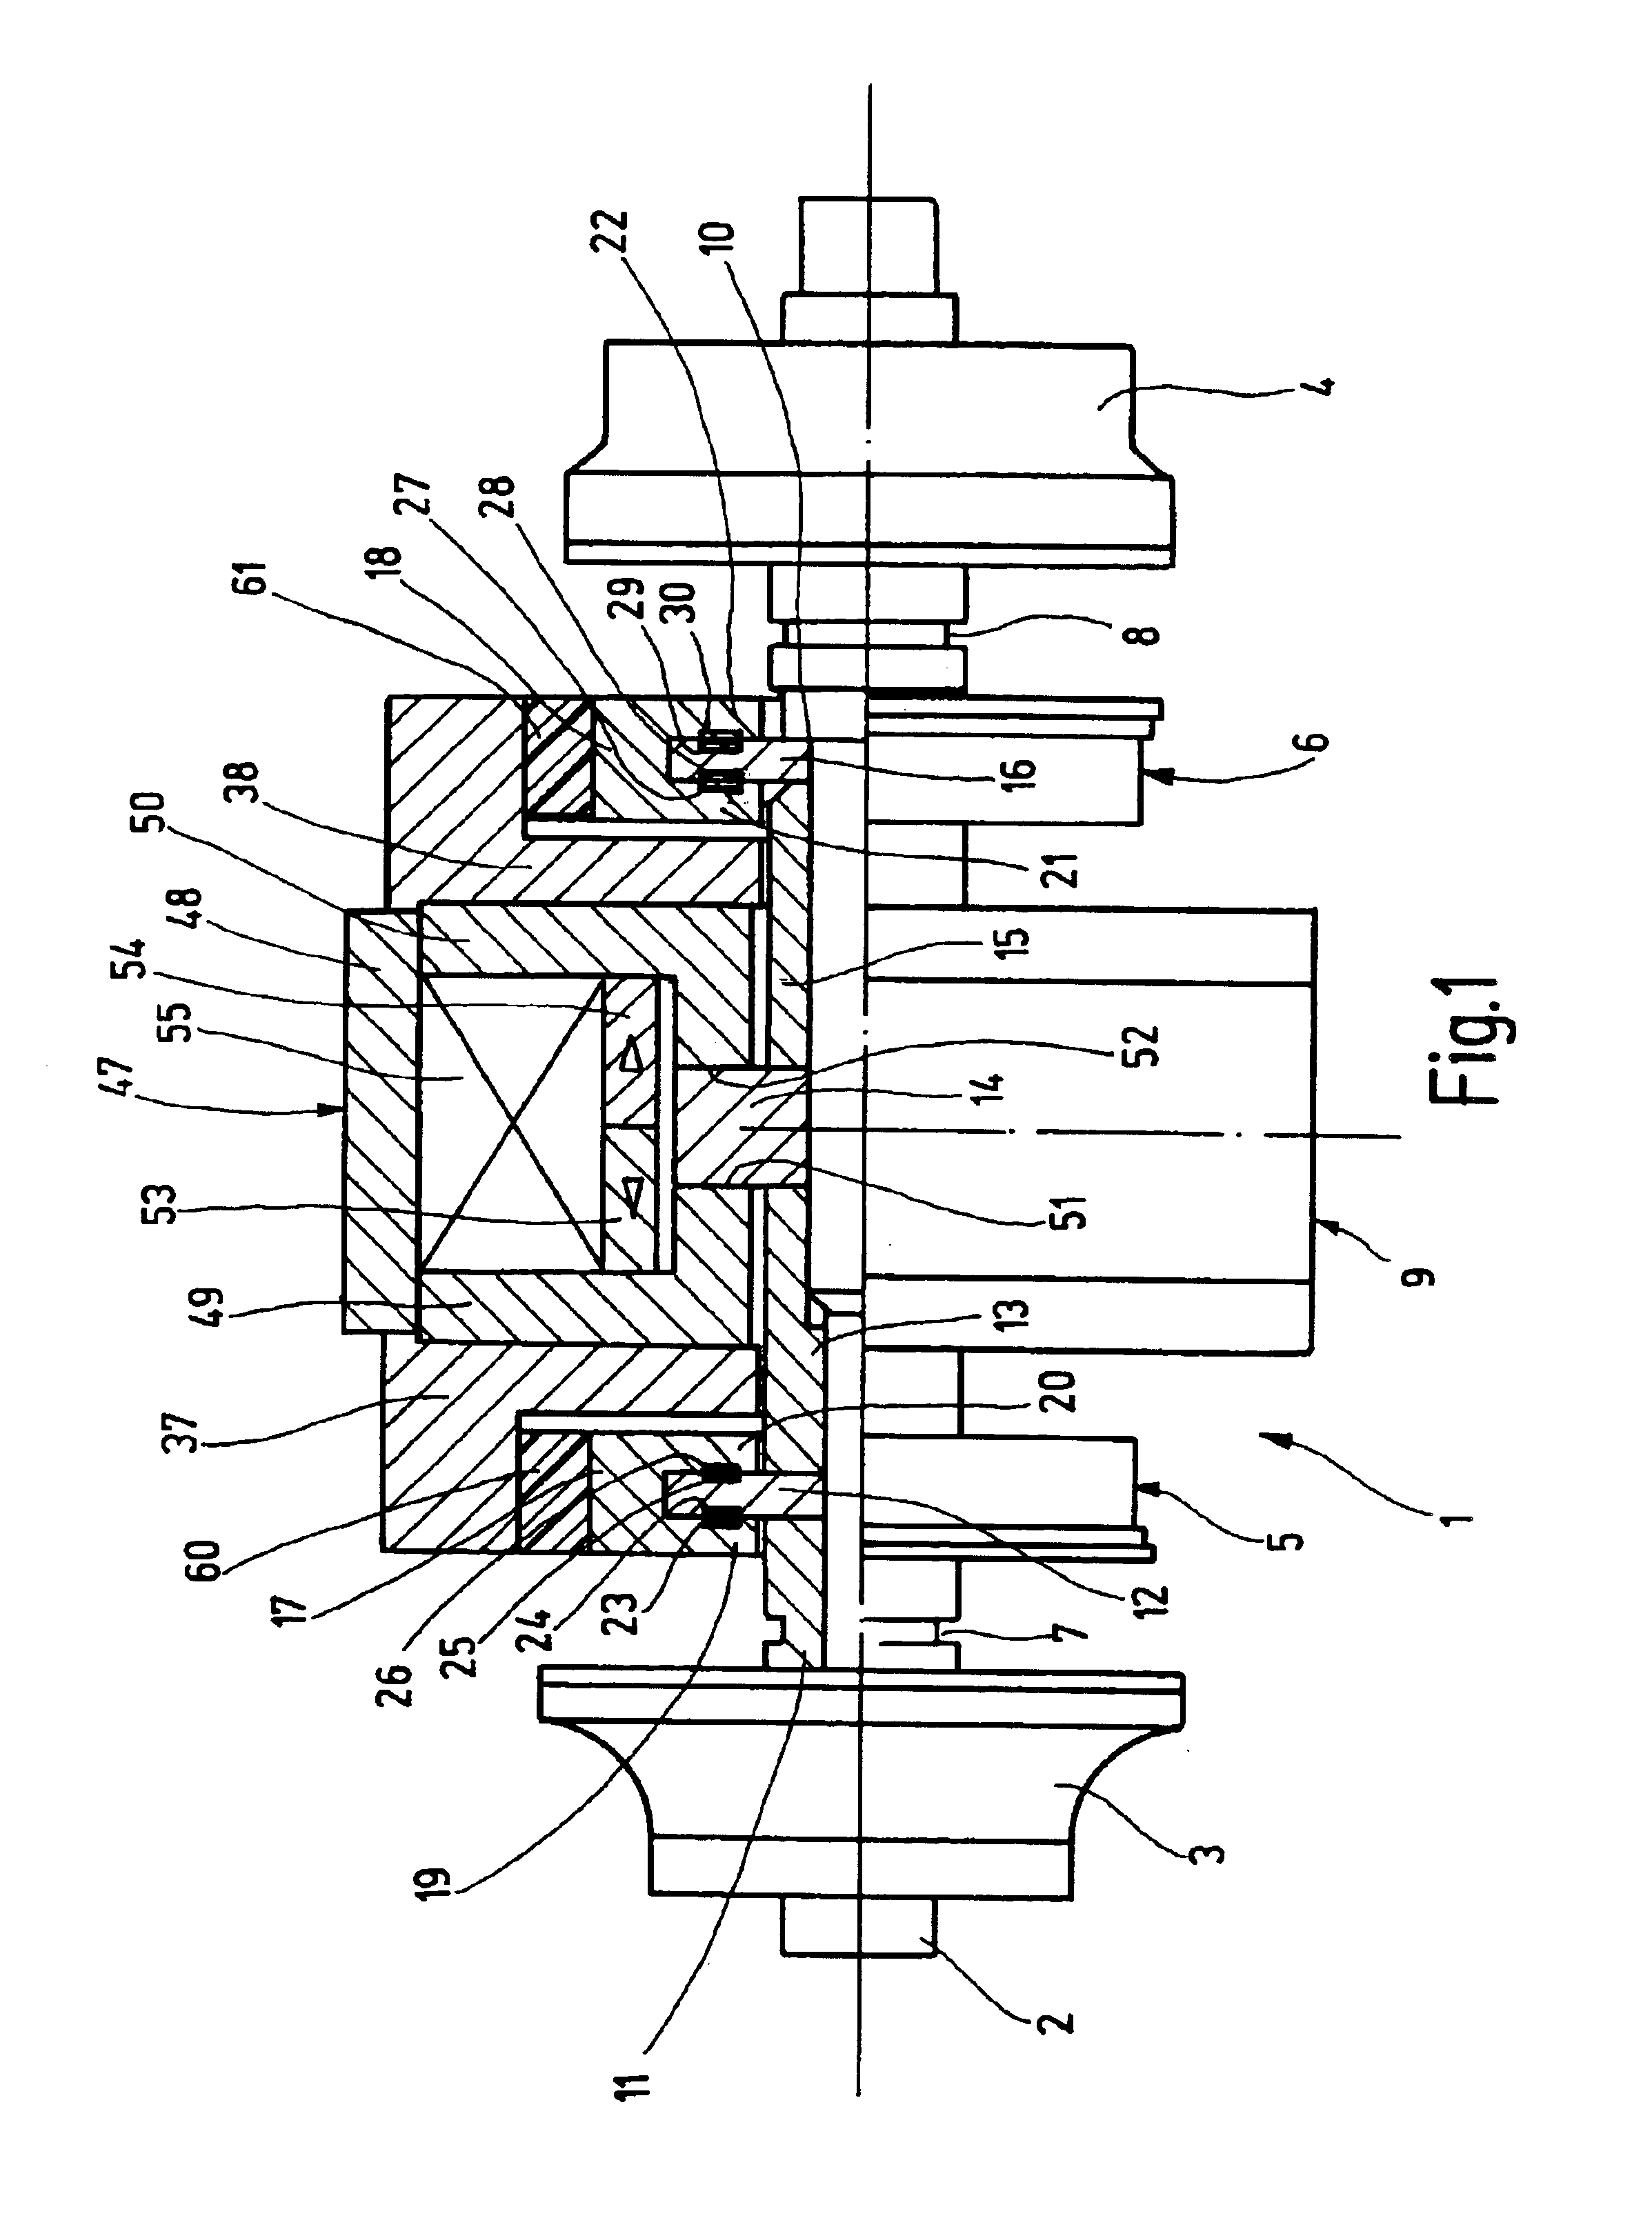 Turbocharger with magnetic bearing system that includes dampers